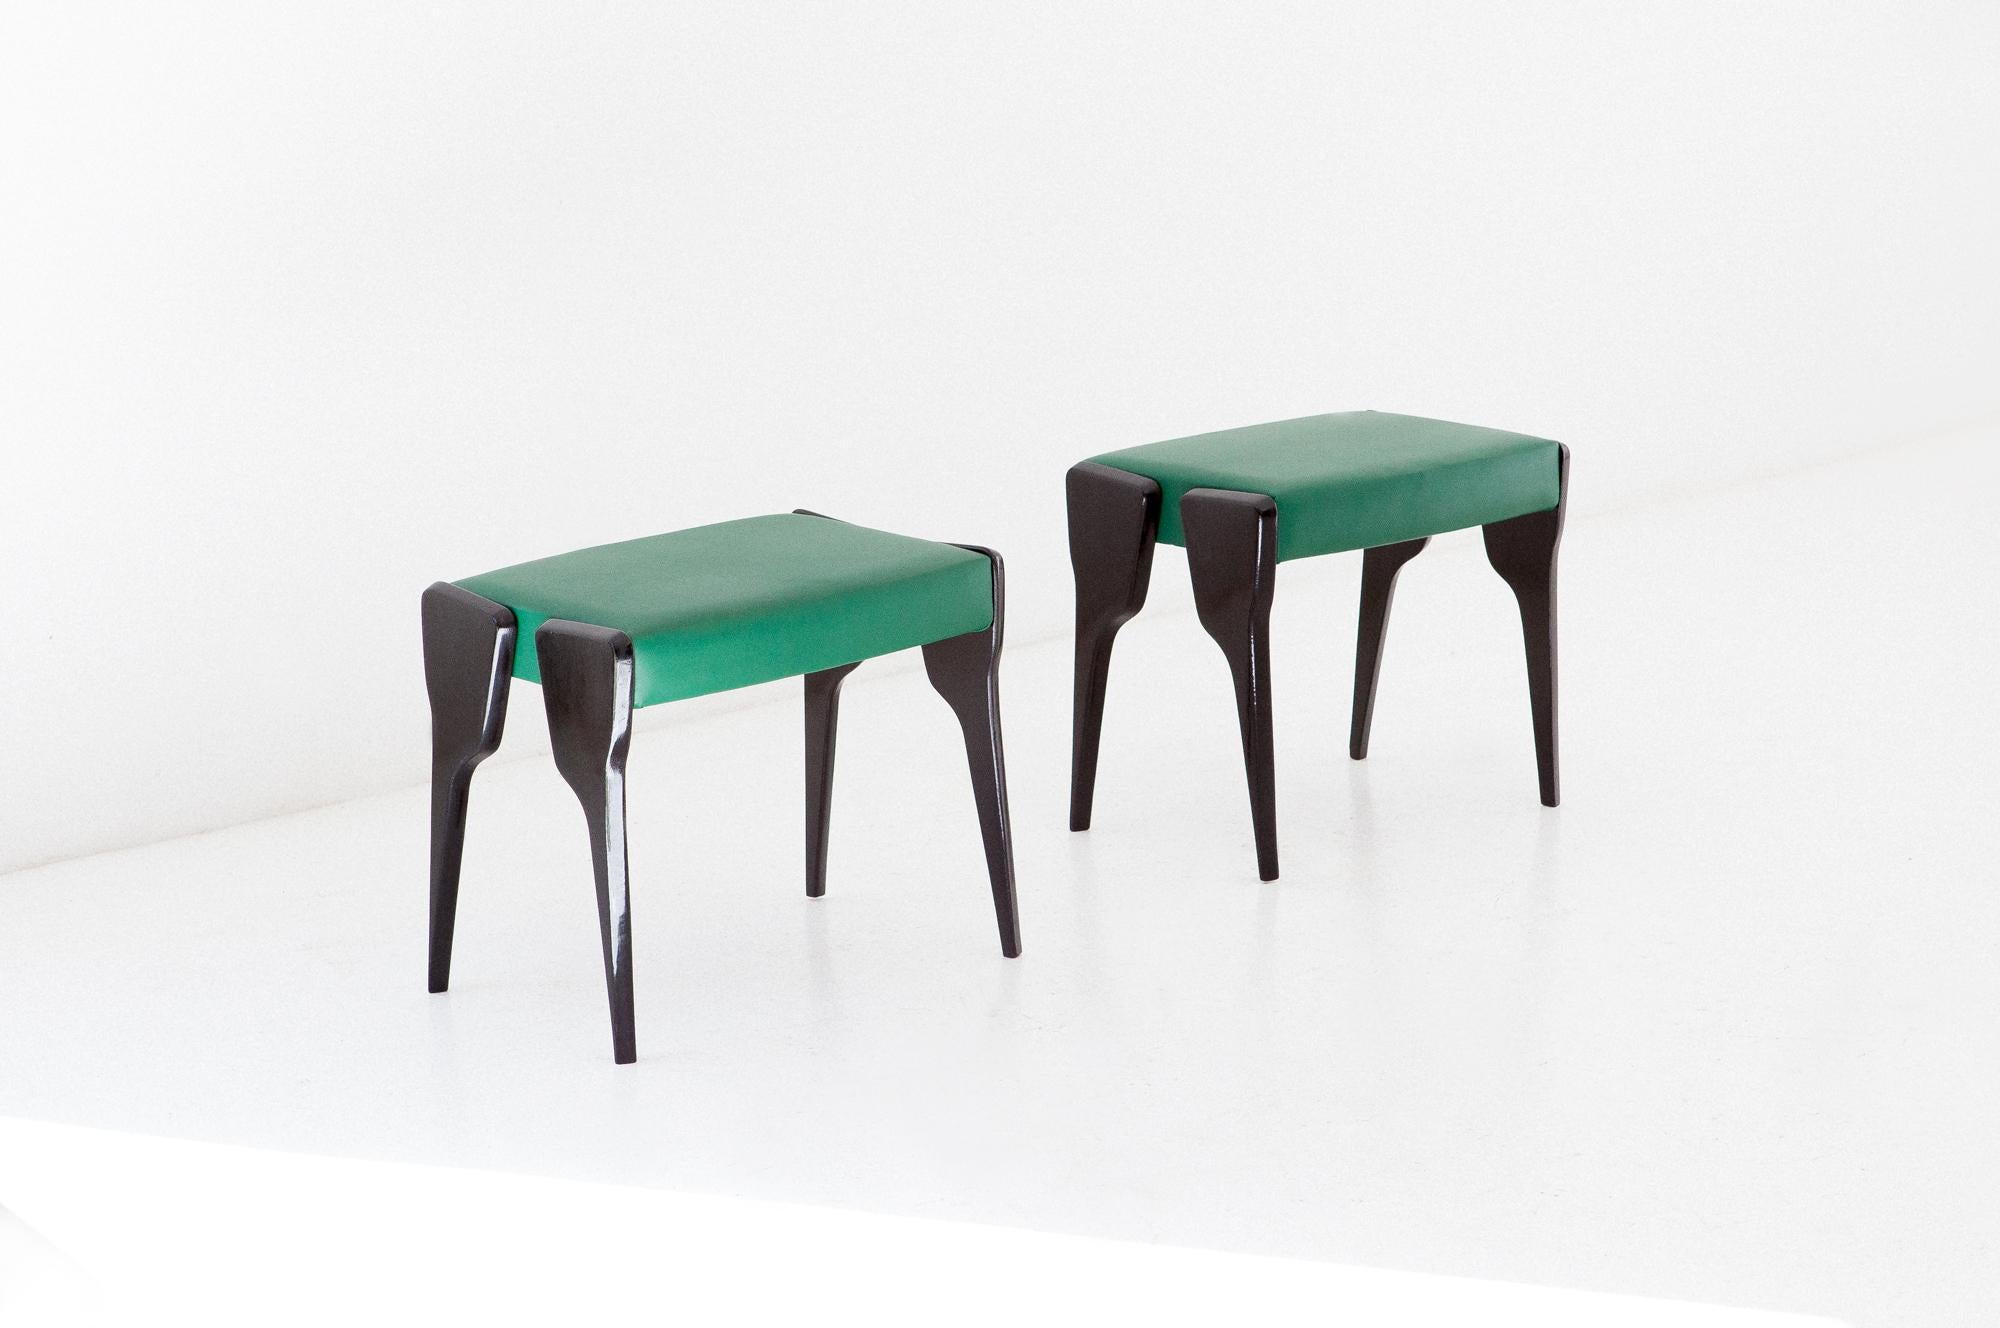 Pair of Italian Modern Stool with Black Mahogany Legs and Natural Green Leather (Italienisch)